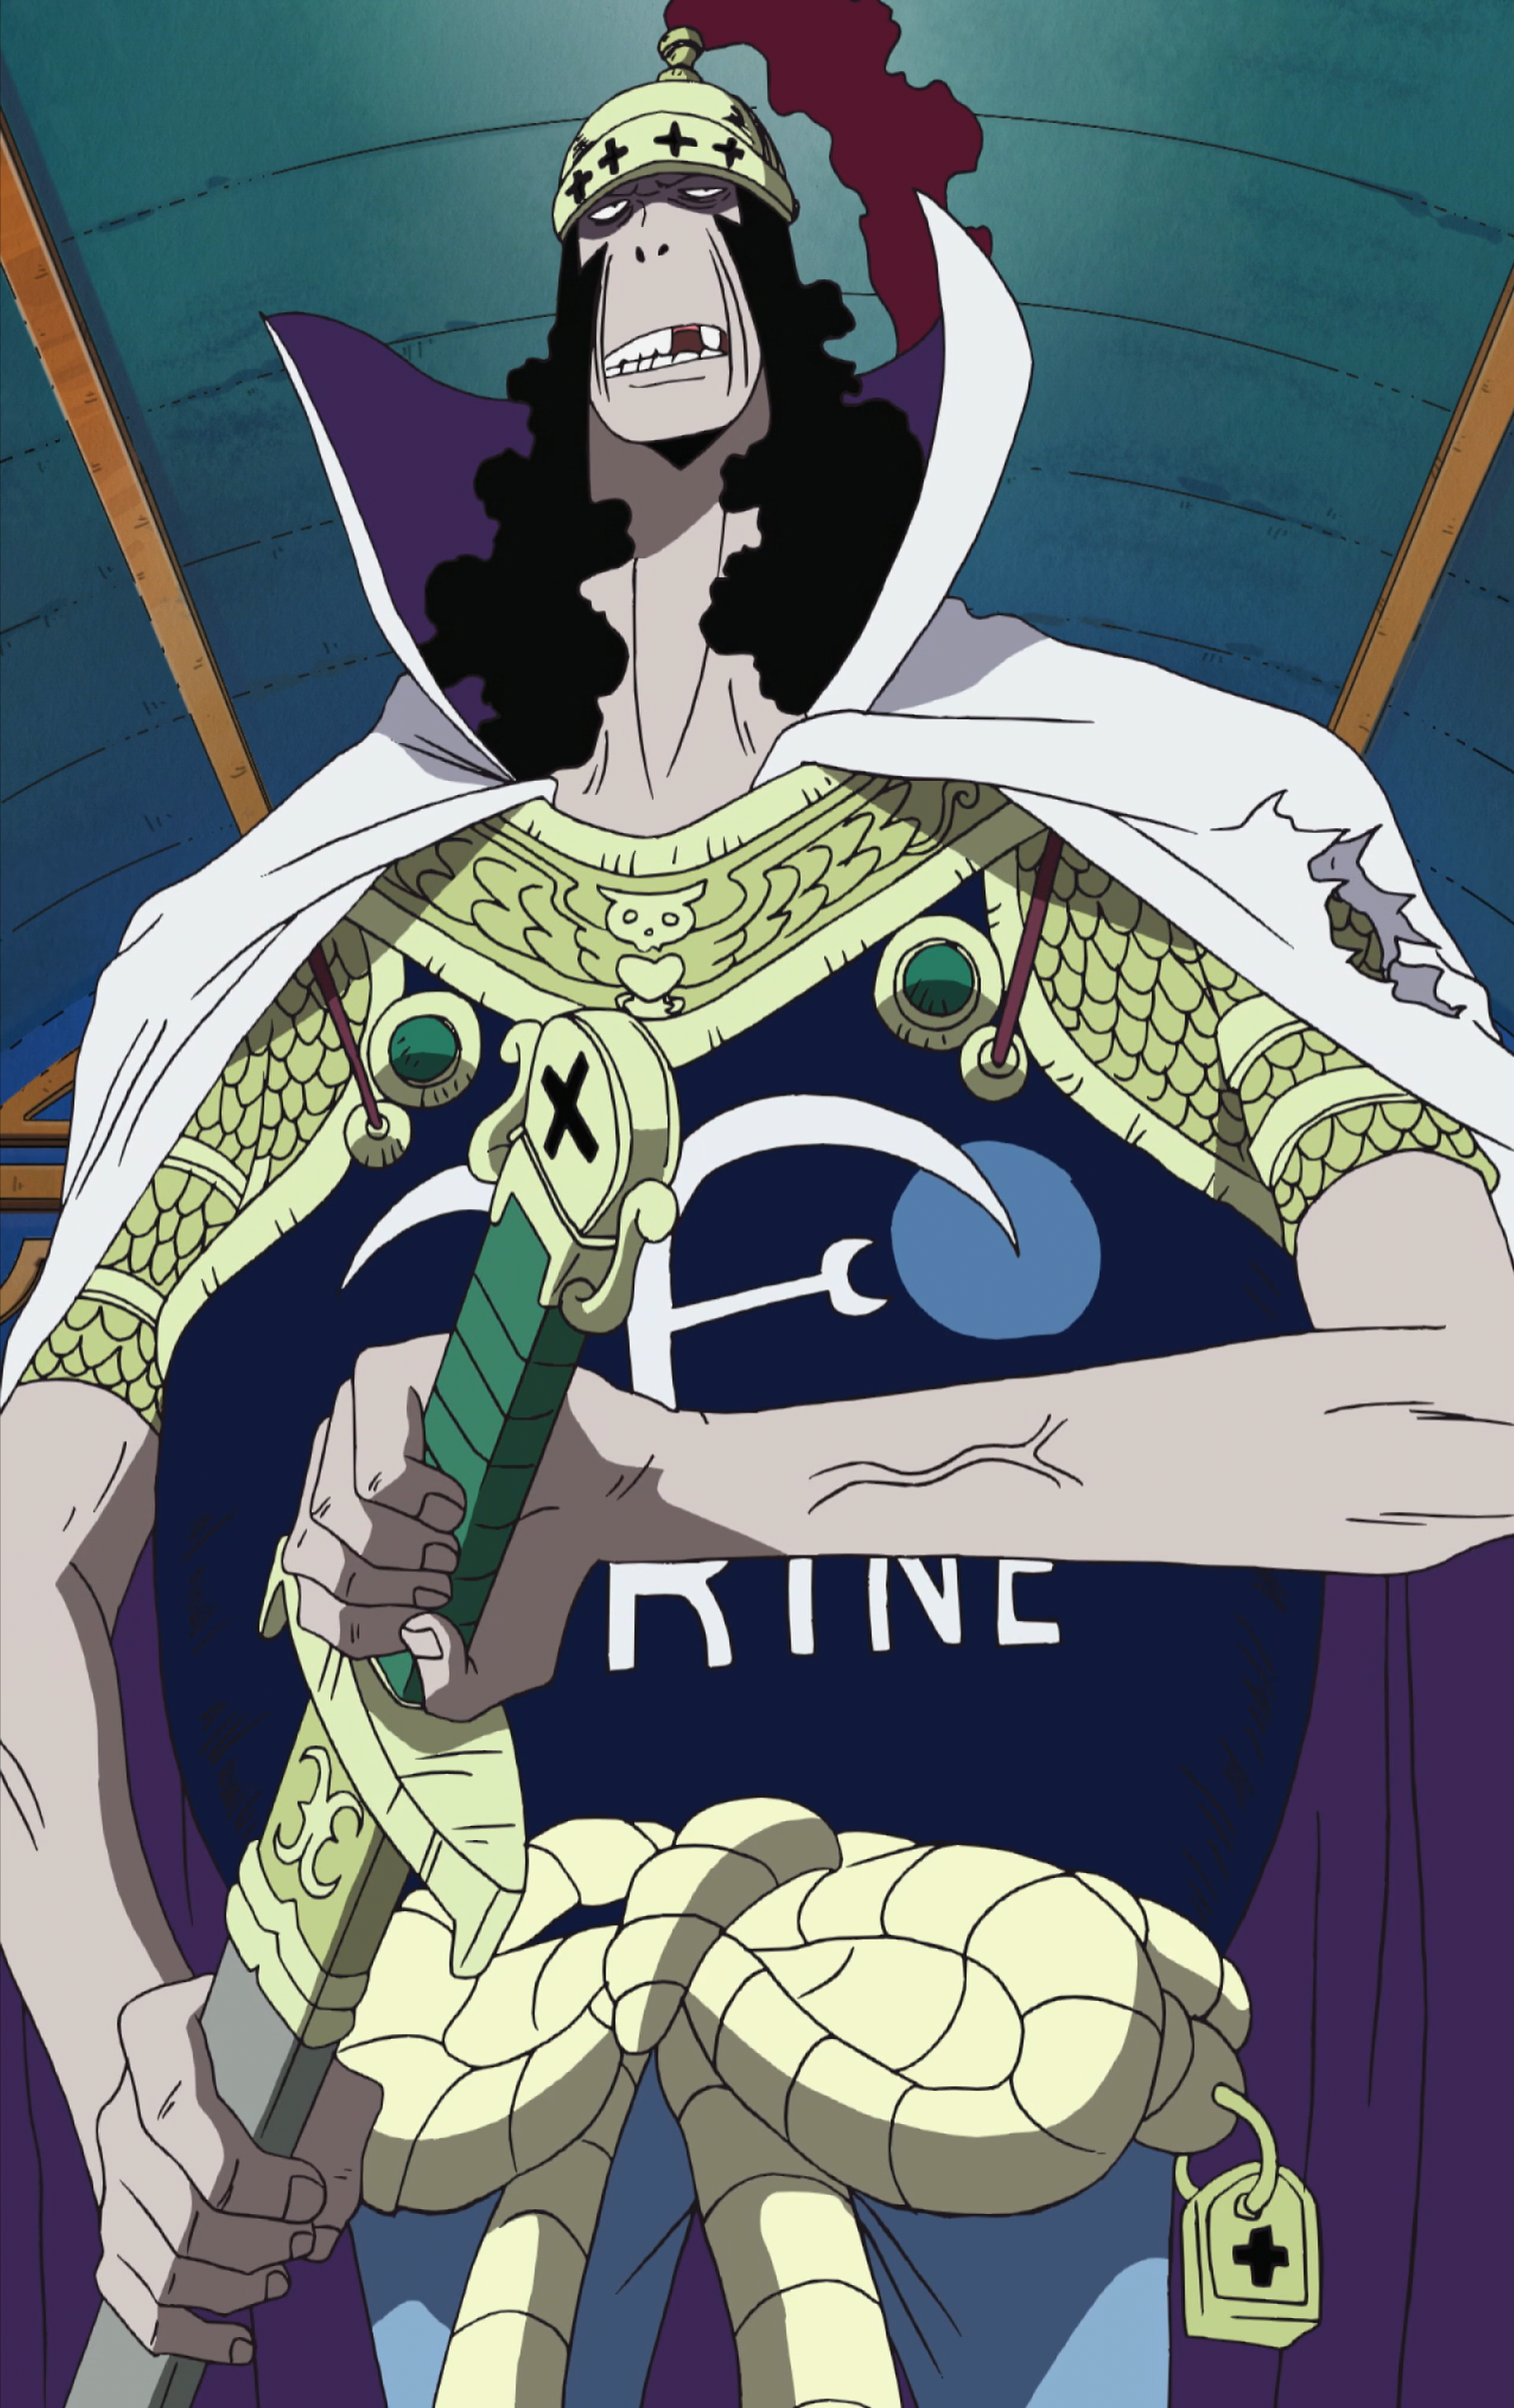 https://static.wikia.nocookie.net/onepiece/images/0/08/T_Bone_Anime_Infobox.png/revision/latest?cb=20230427165456